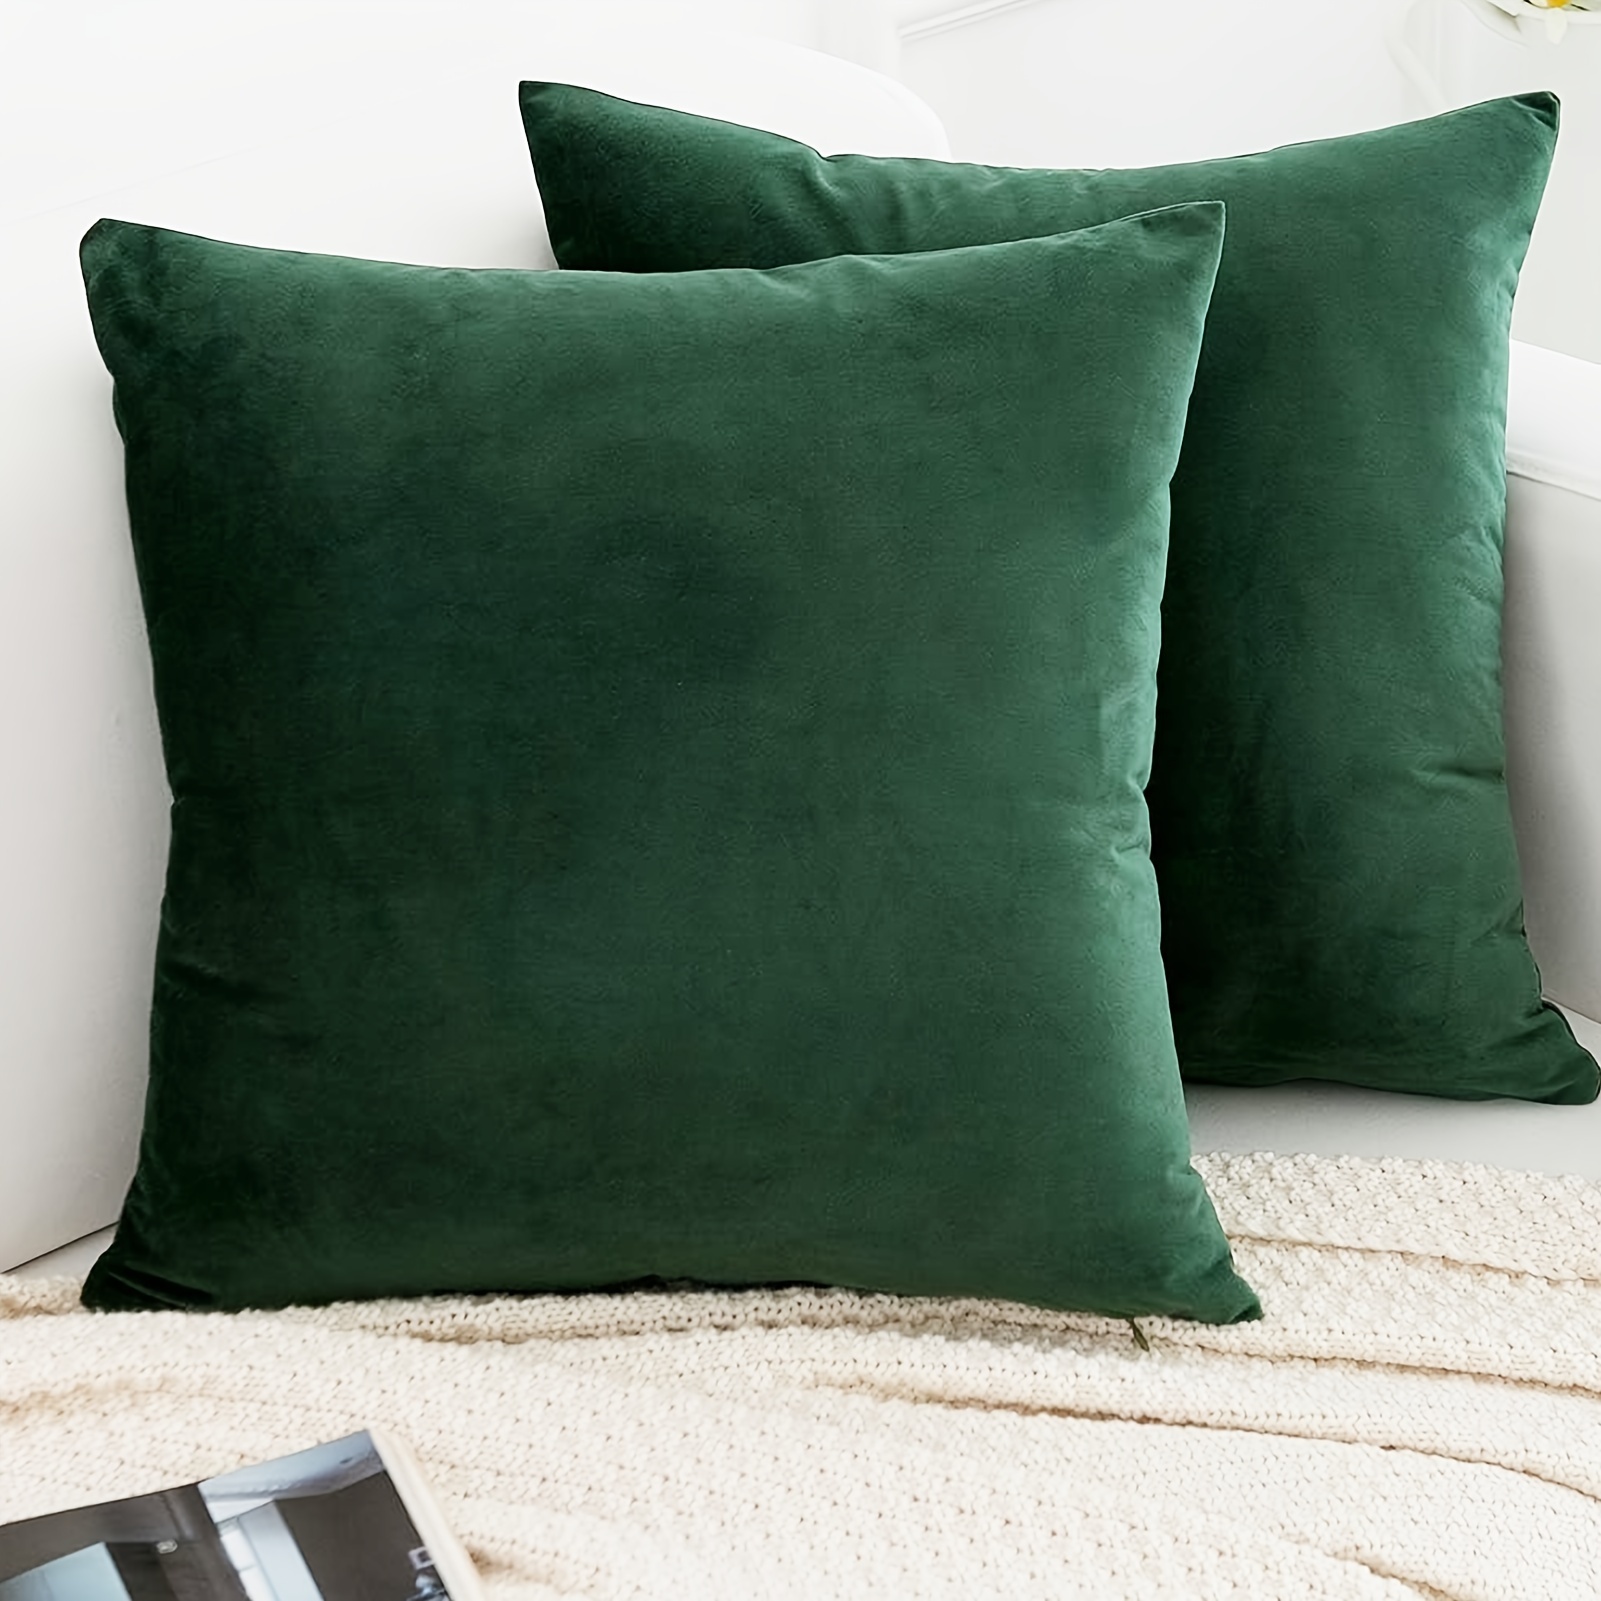 2 Packs Decorative Throw Pillow Covers 18x18 Inch for 18 x 18-Inch Sage  Green